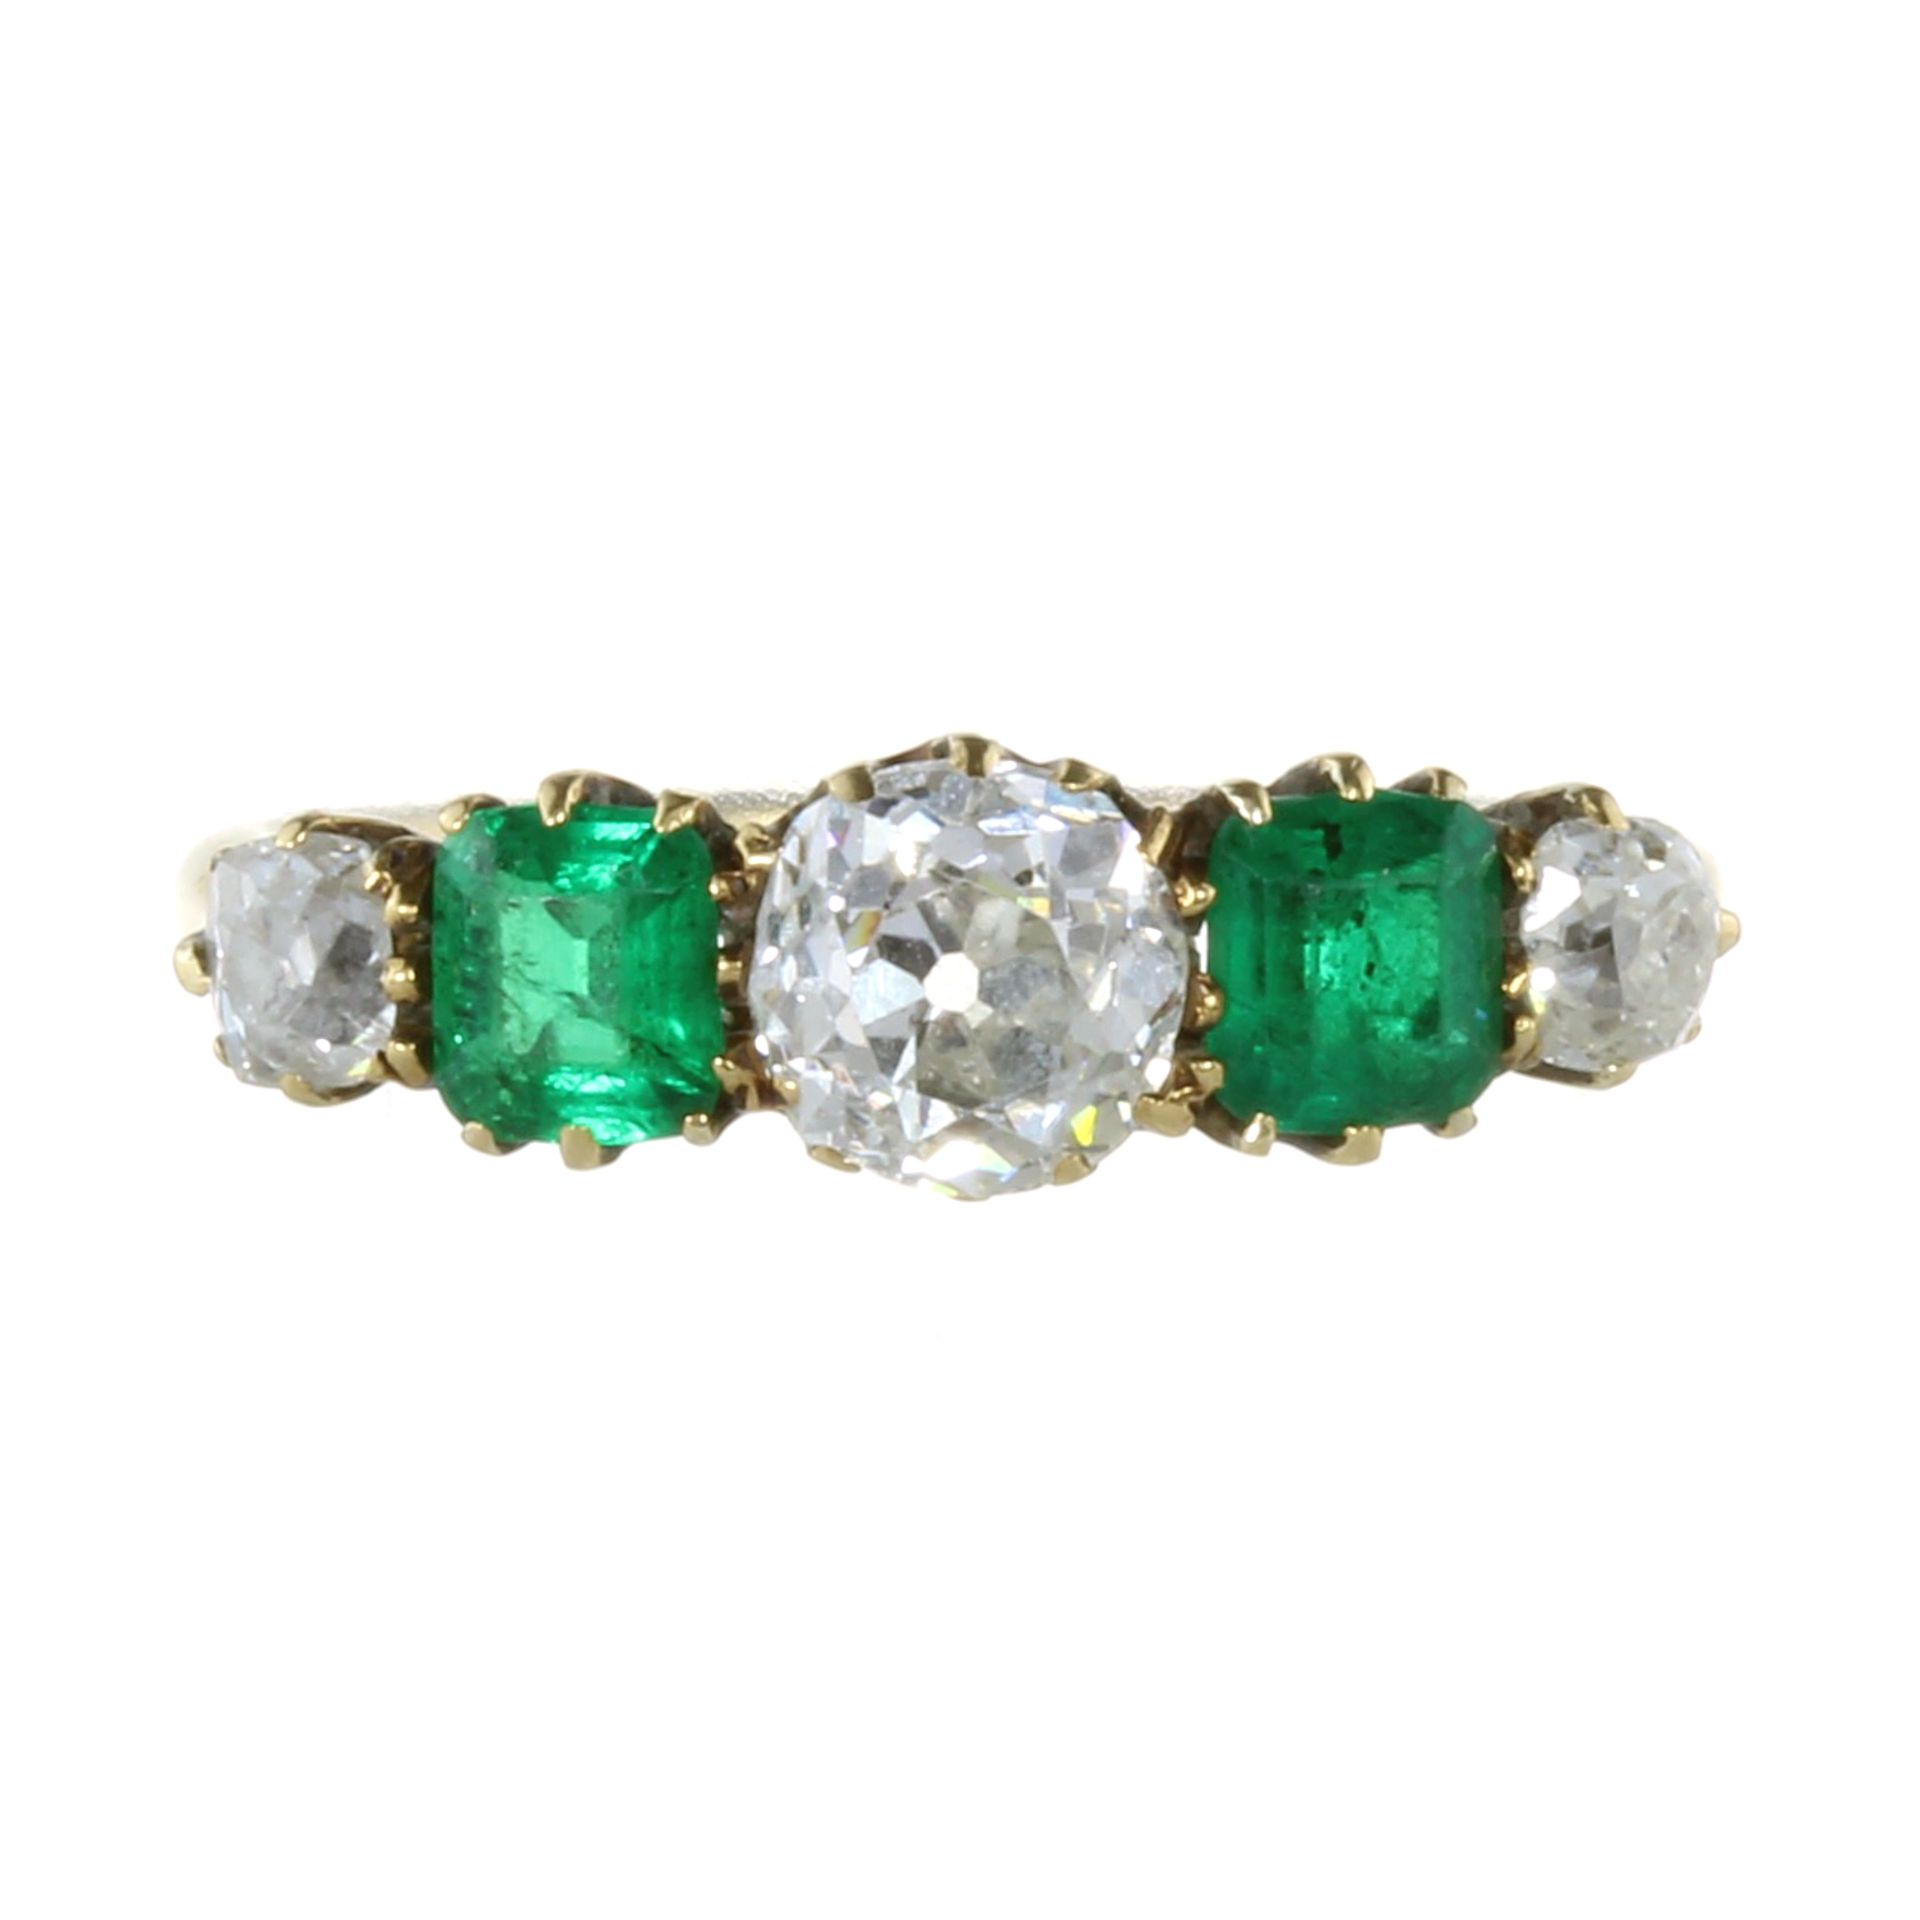 AN ANTIQUE DIAMOND AND EMERALD FIVE STONE RING in 18ct yellow gold set with a row of five